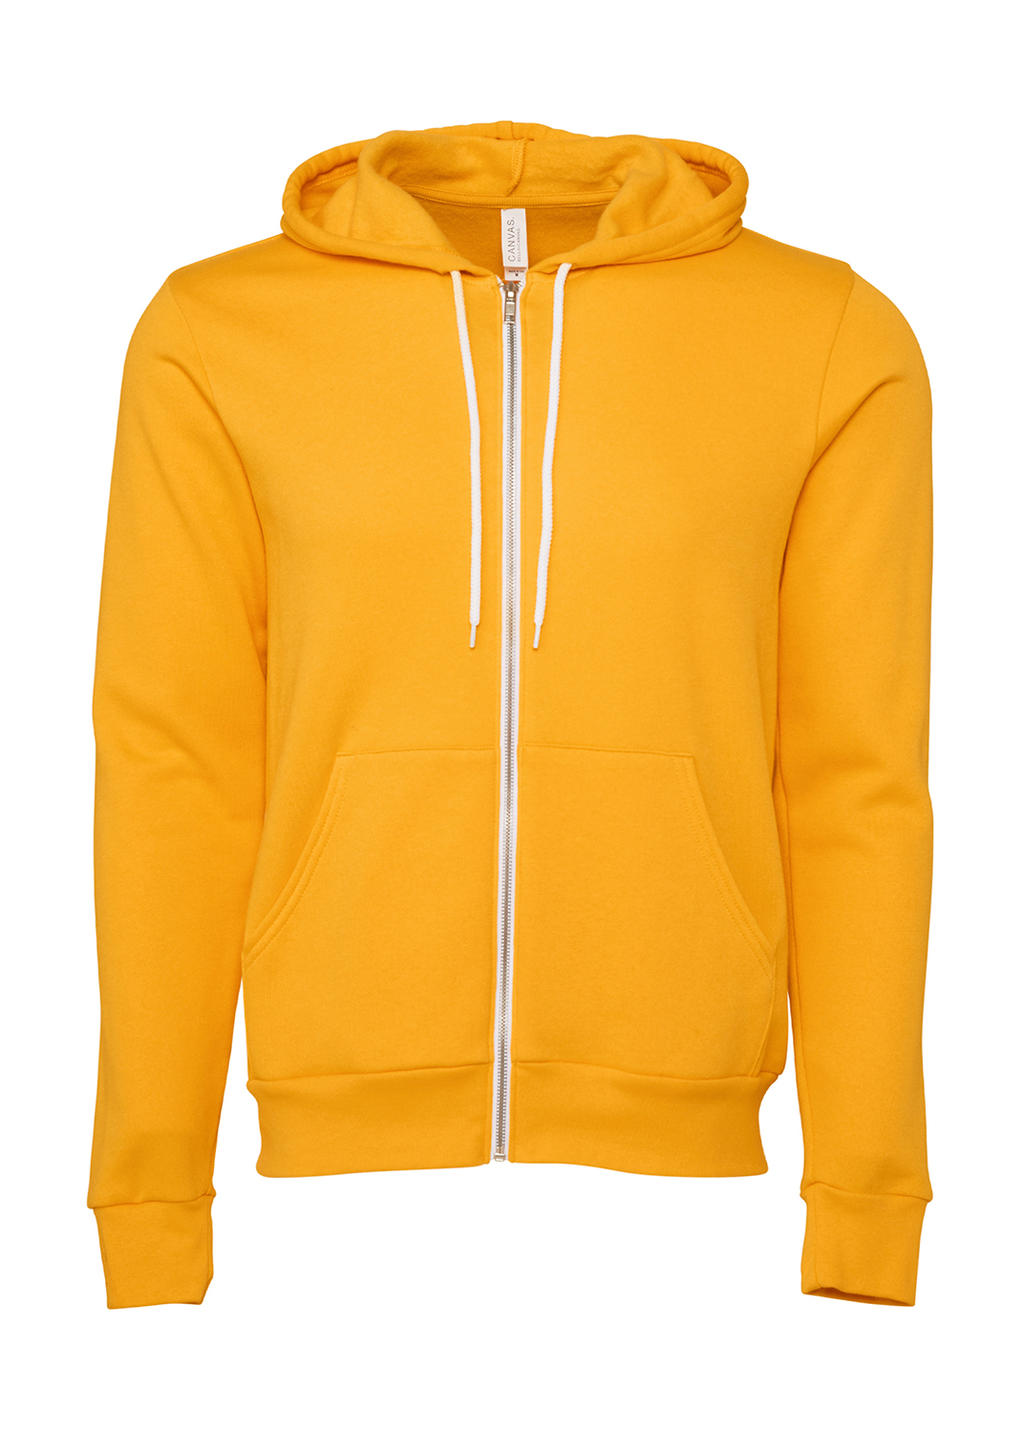  Unisex Poly-Cotton Full Zip Hoodie in Farbe Gold